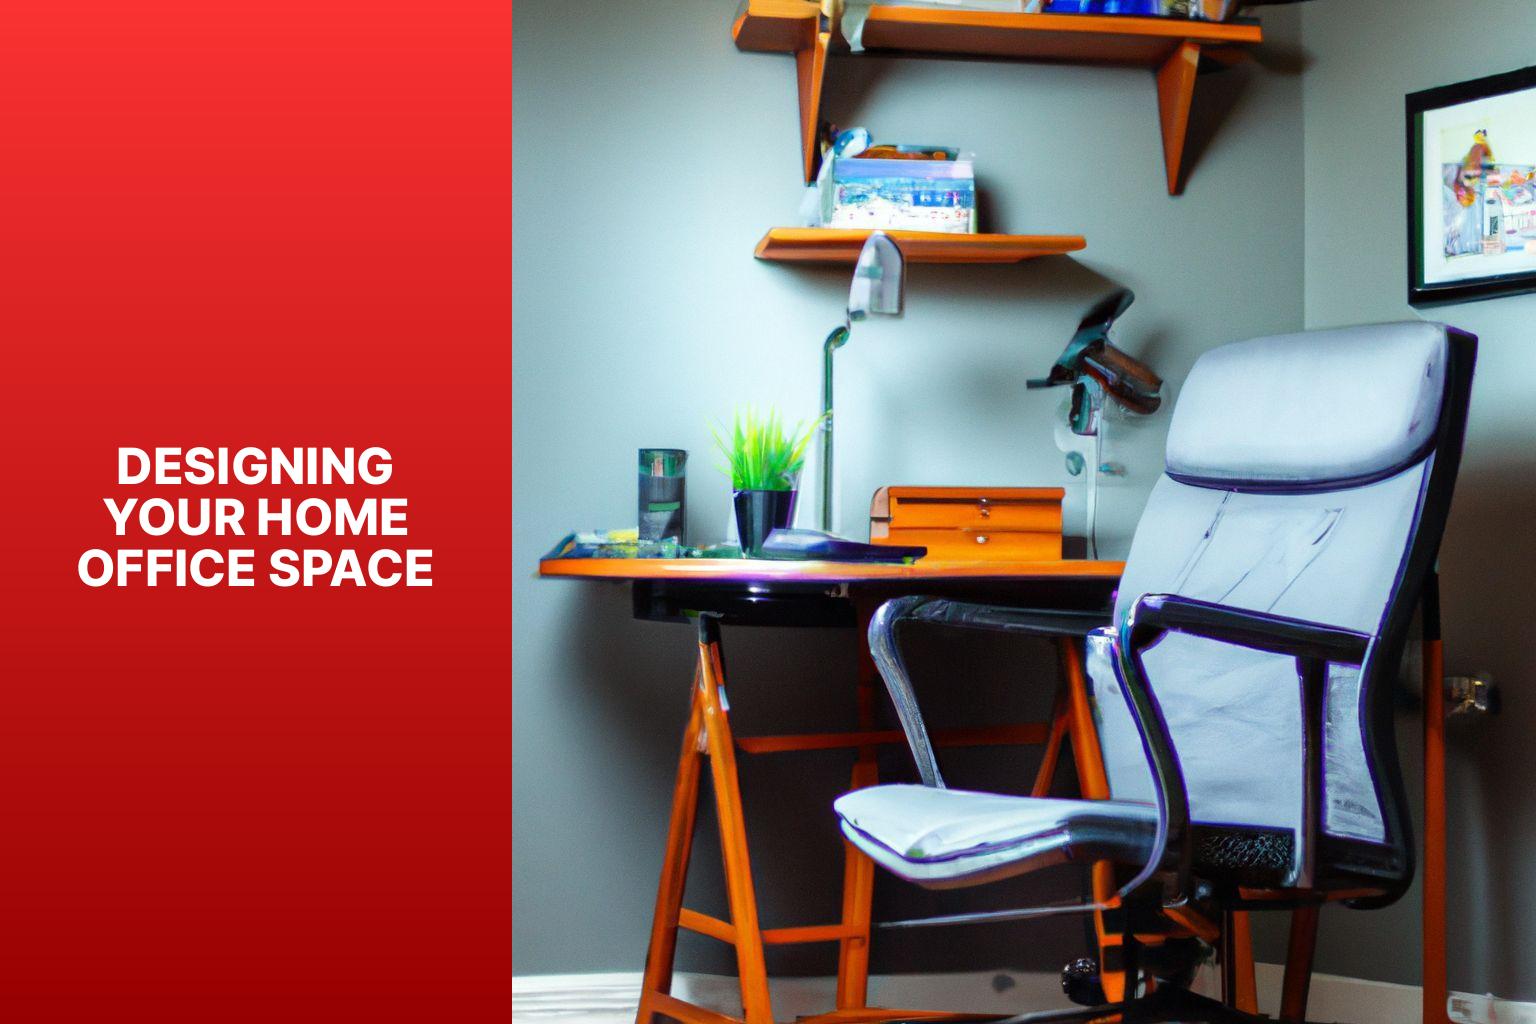 Designing Your Home Office Space - How to Optimize Your Home Office for Productivity 